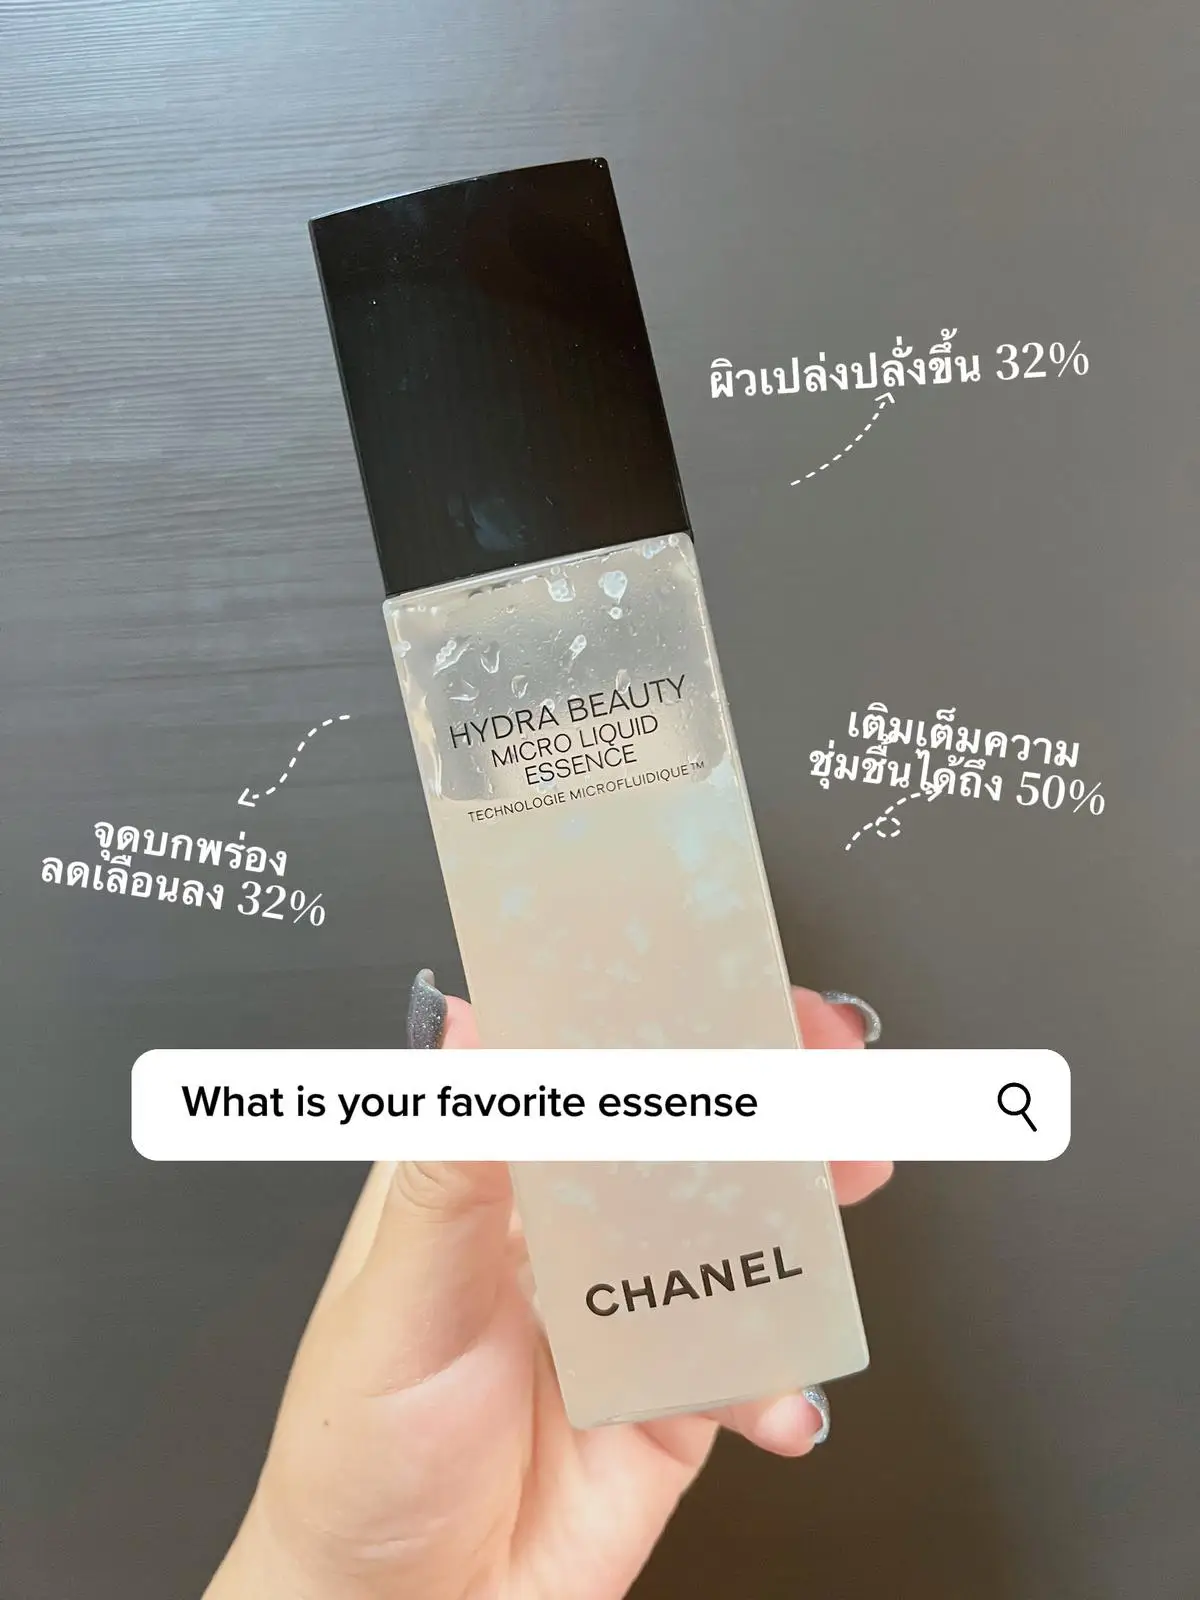 HYDRA BEAUTY MICRO LIQUID ESSENCE | Gallery posted by อาหยก